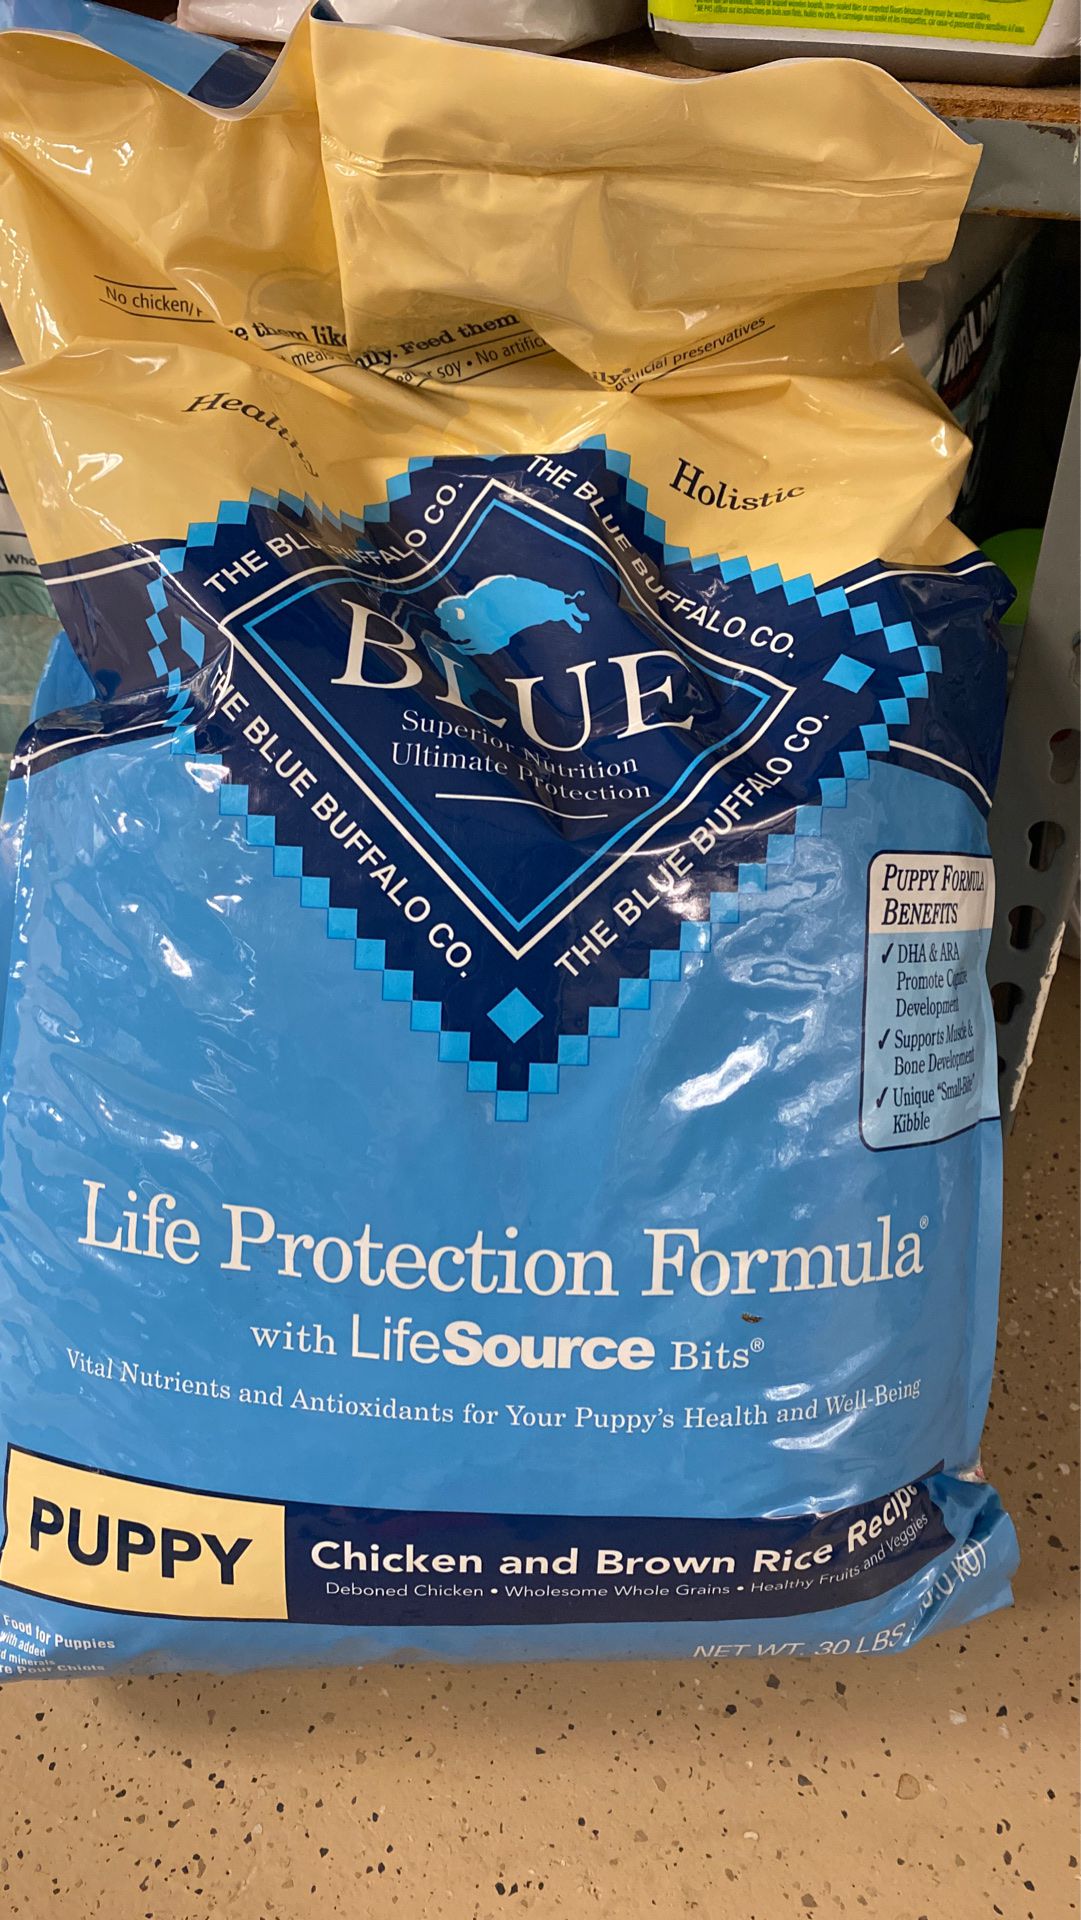 Blue Buffalo puppy chicken and brown rice 30 pound bag